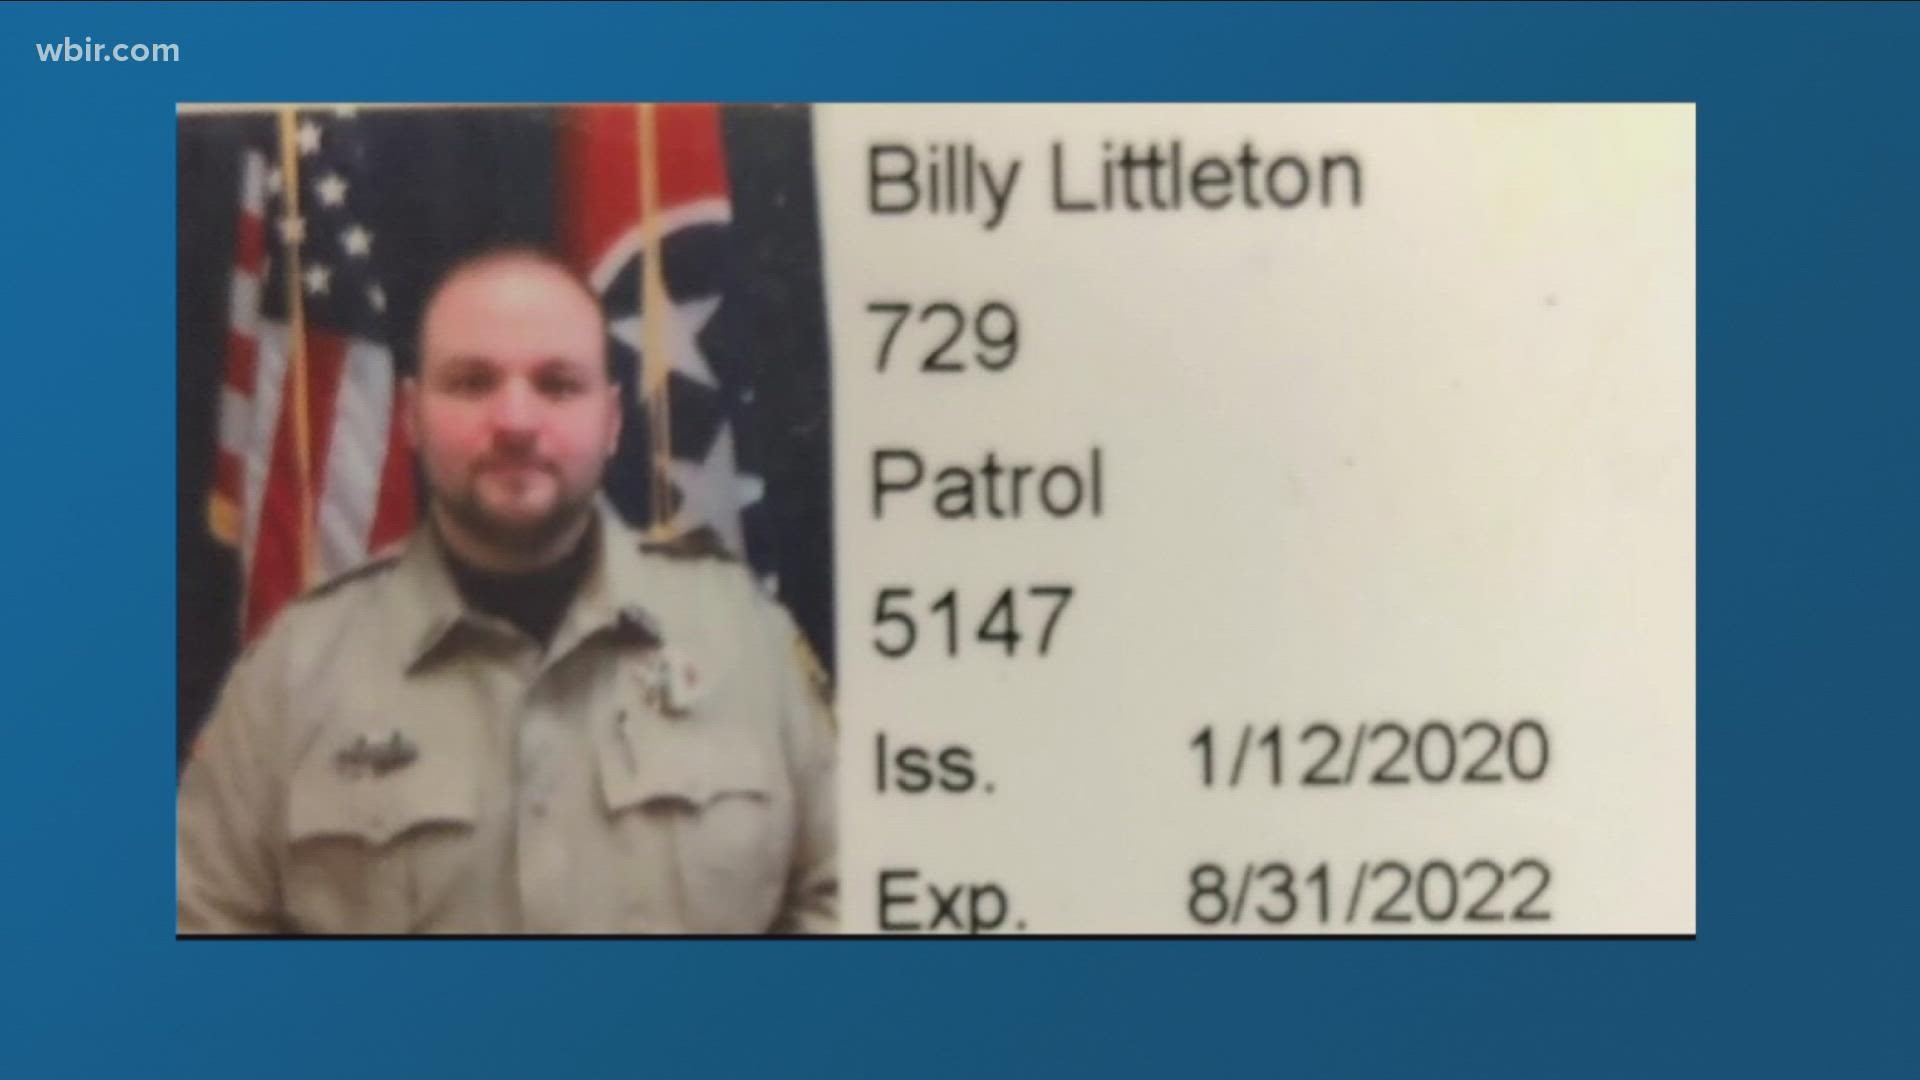 A deputy was suspended for 30 days without pay after he admitted to shouting a racial slur that was caught on video and shared online, the Monroe Co. sheriff said.